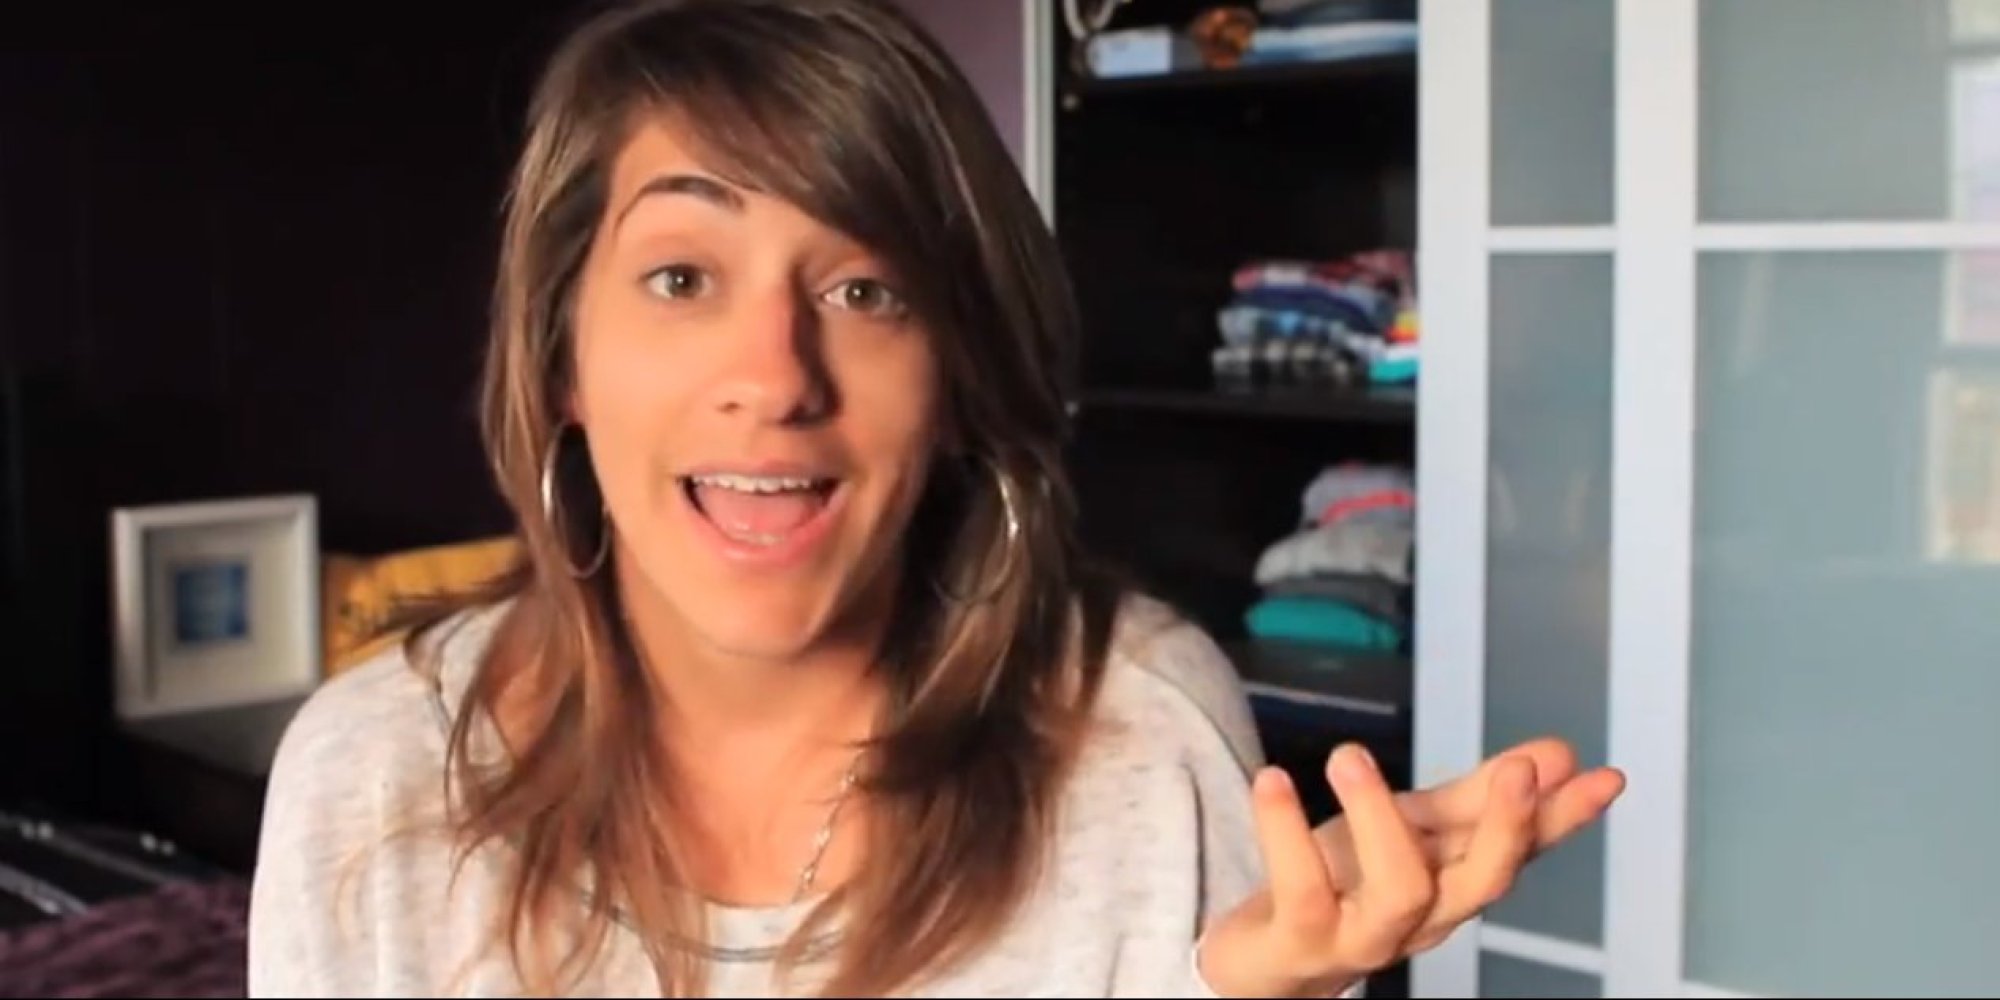 Lesbians Explain Sleeping With Men Is A New Video From Arielle Scarcella Vlogger Huffpost